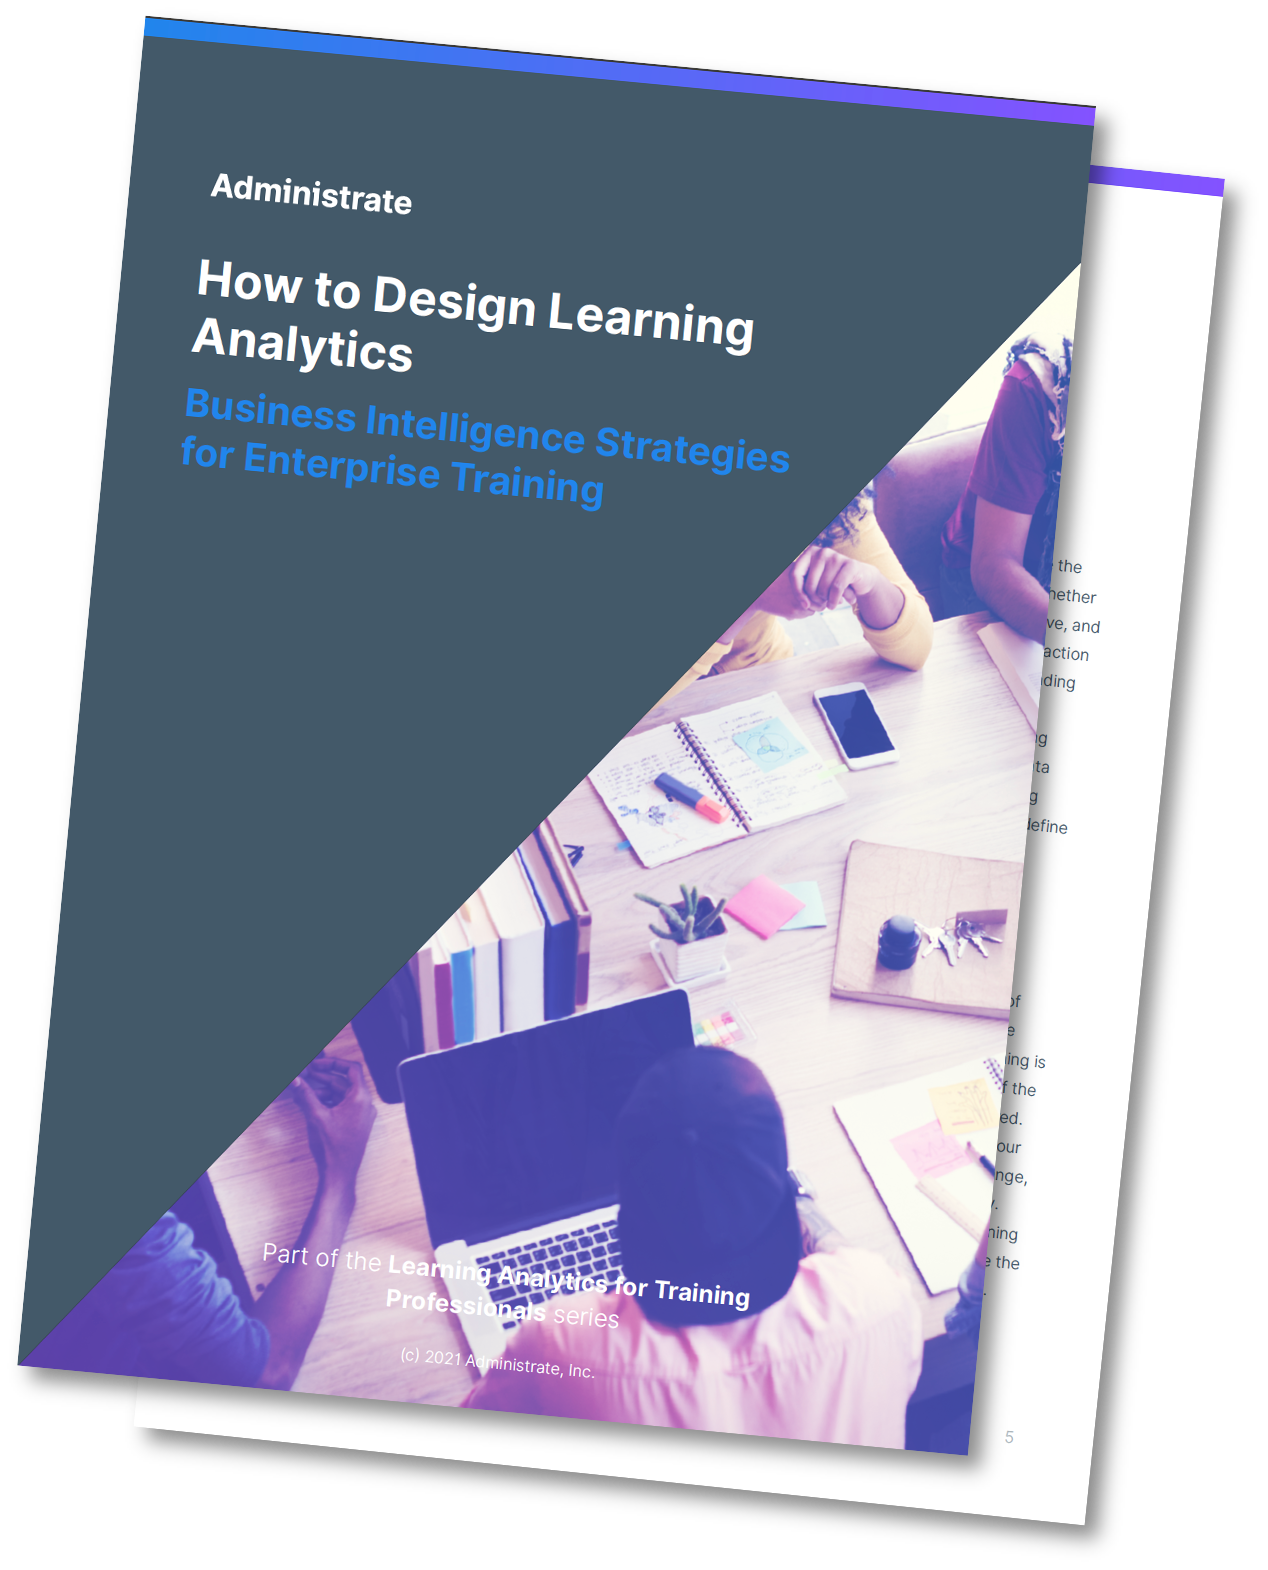 Explore how leading training teams use Business Intelligence strategies to design learning analytics that help them make data-driven decisions